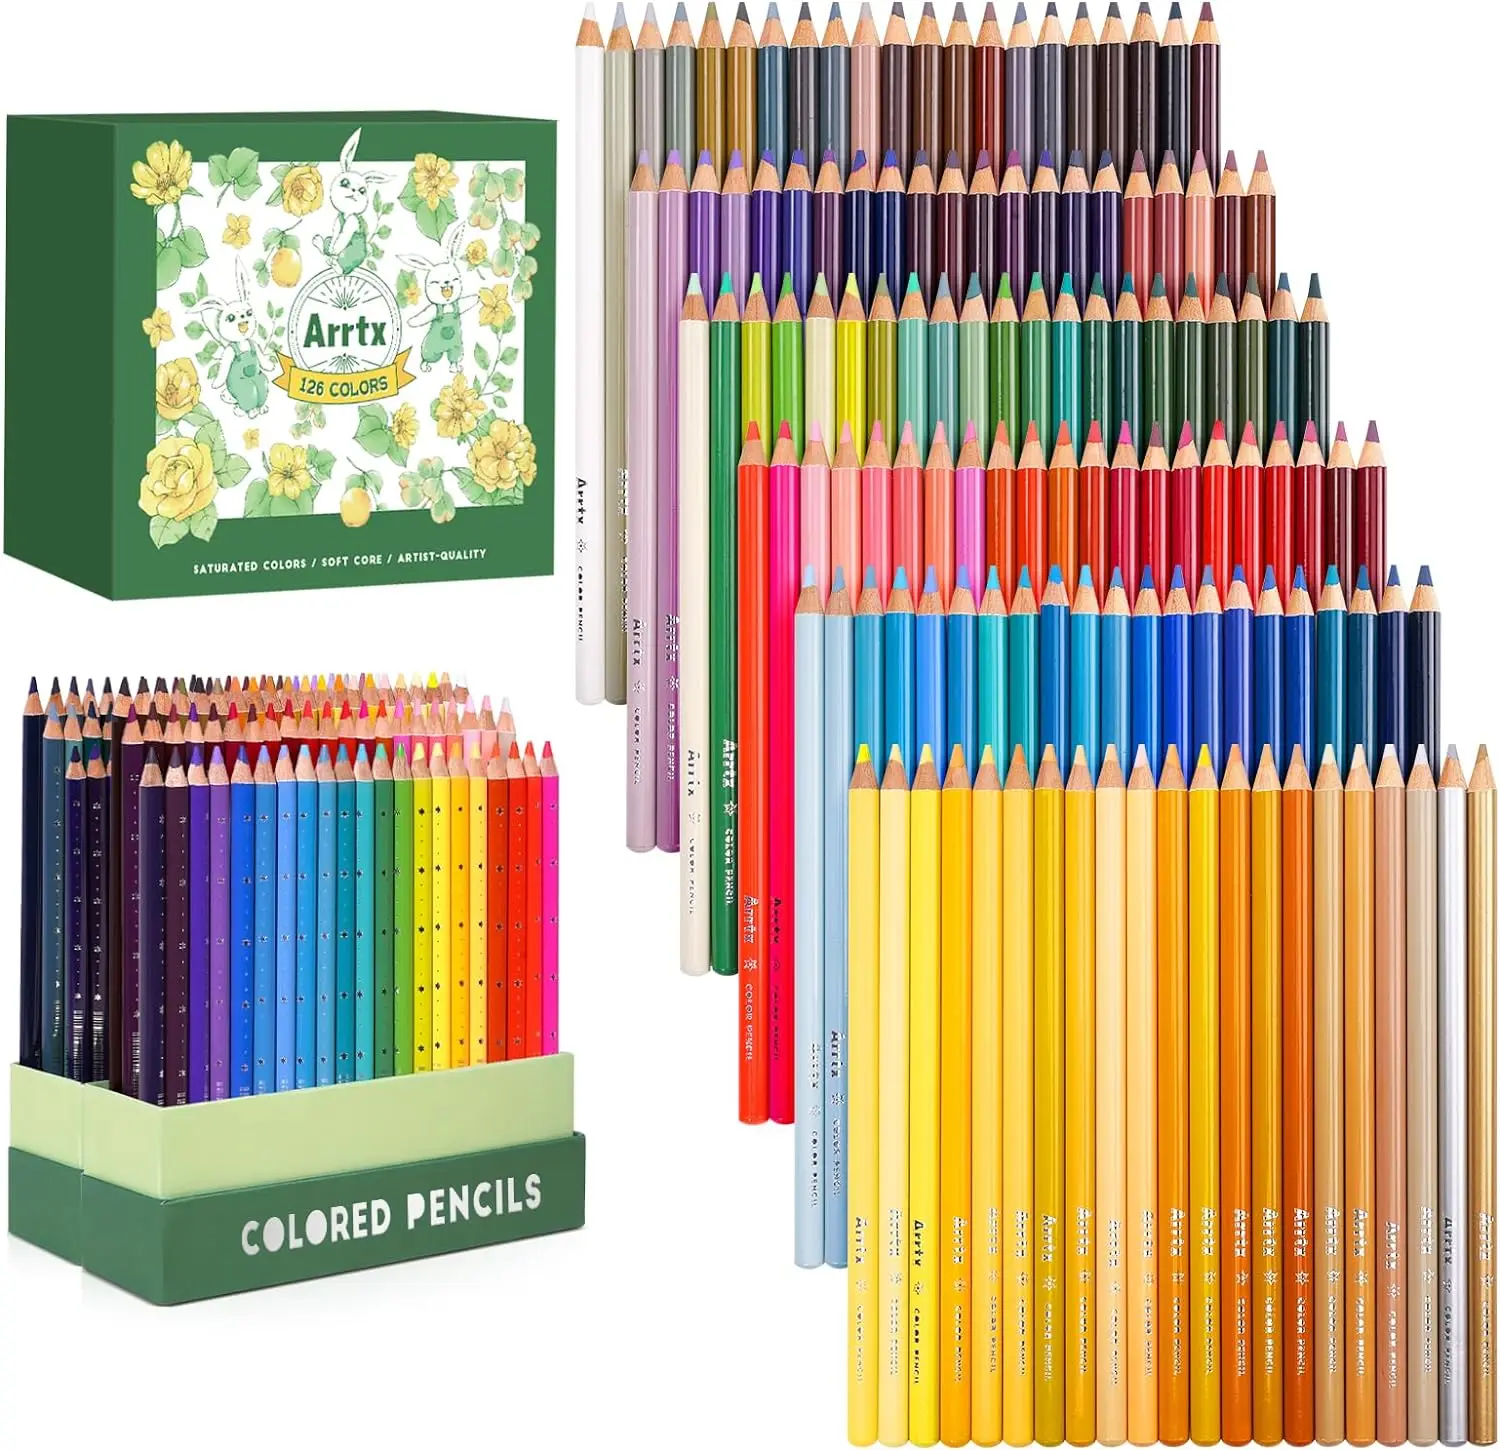  520 Colored Pencils, Rich Pigmented Soft Core Coloring Pencils,  Pre-sharpened Color Pencil Set with DIY Color Chart, Artist Quality Colored  Pencils for Adult Coloring, Kids & Artists Drawing Sketching 